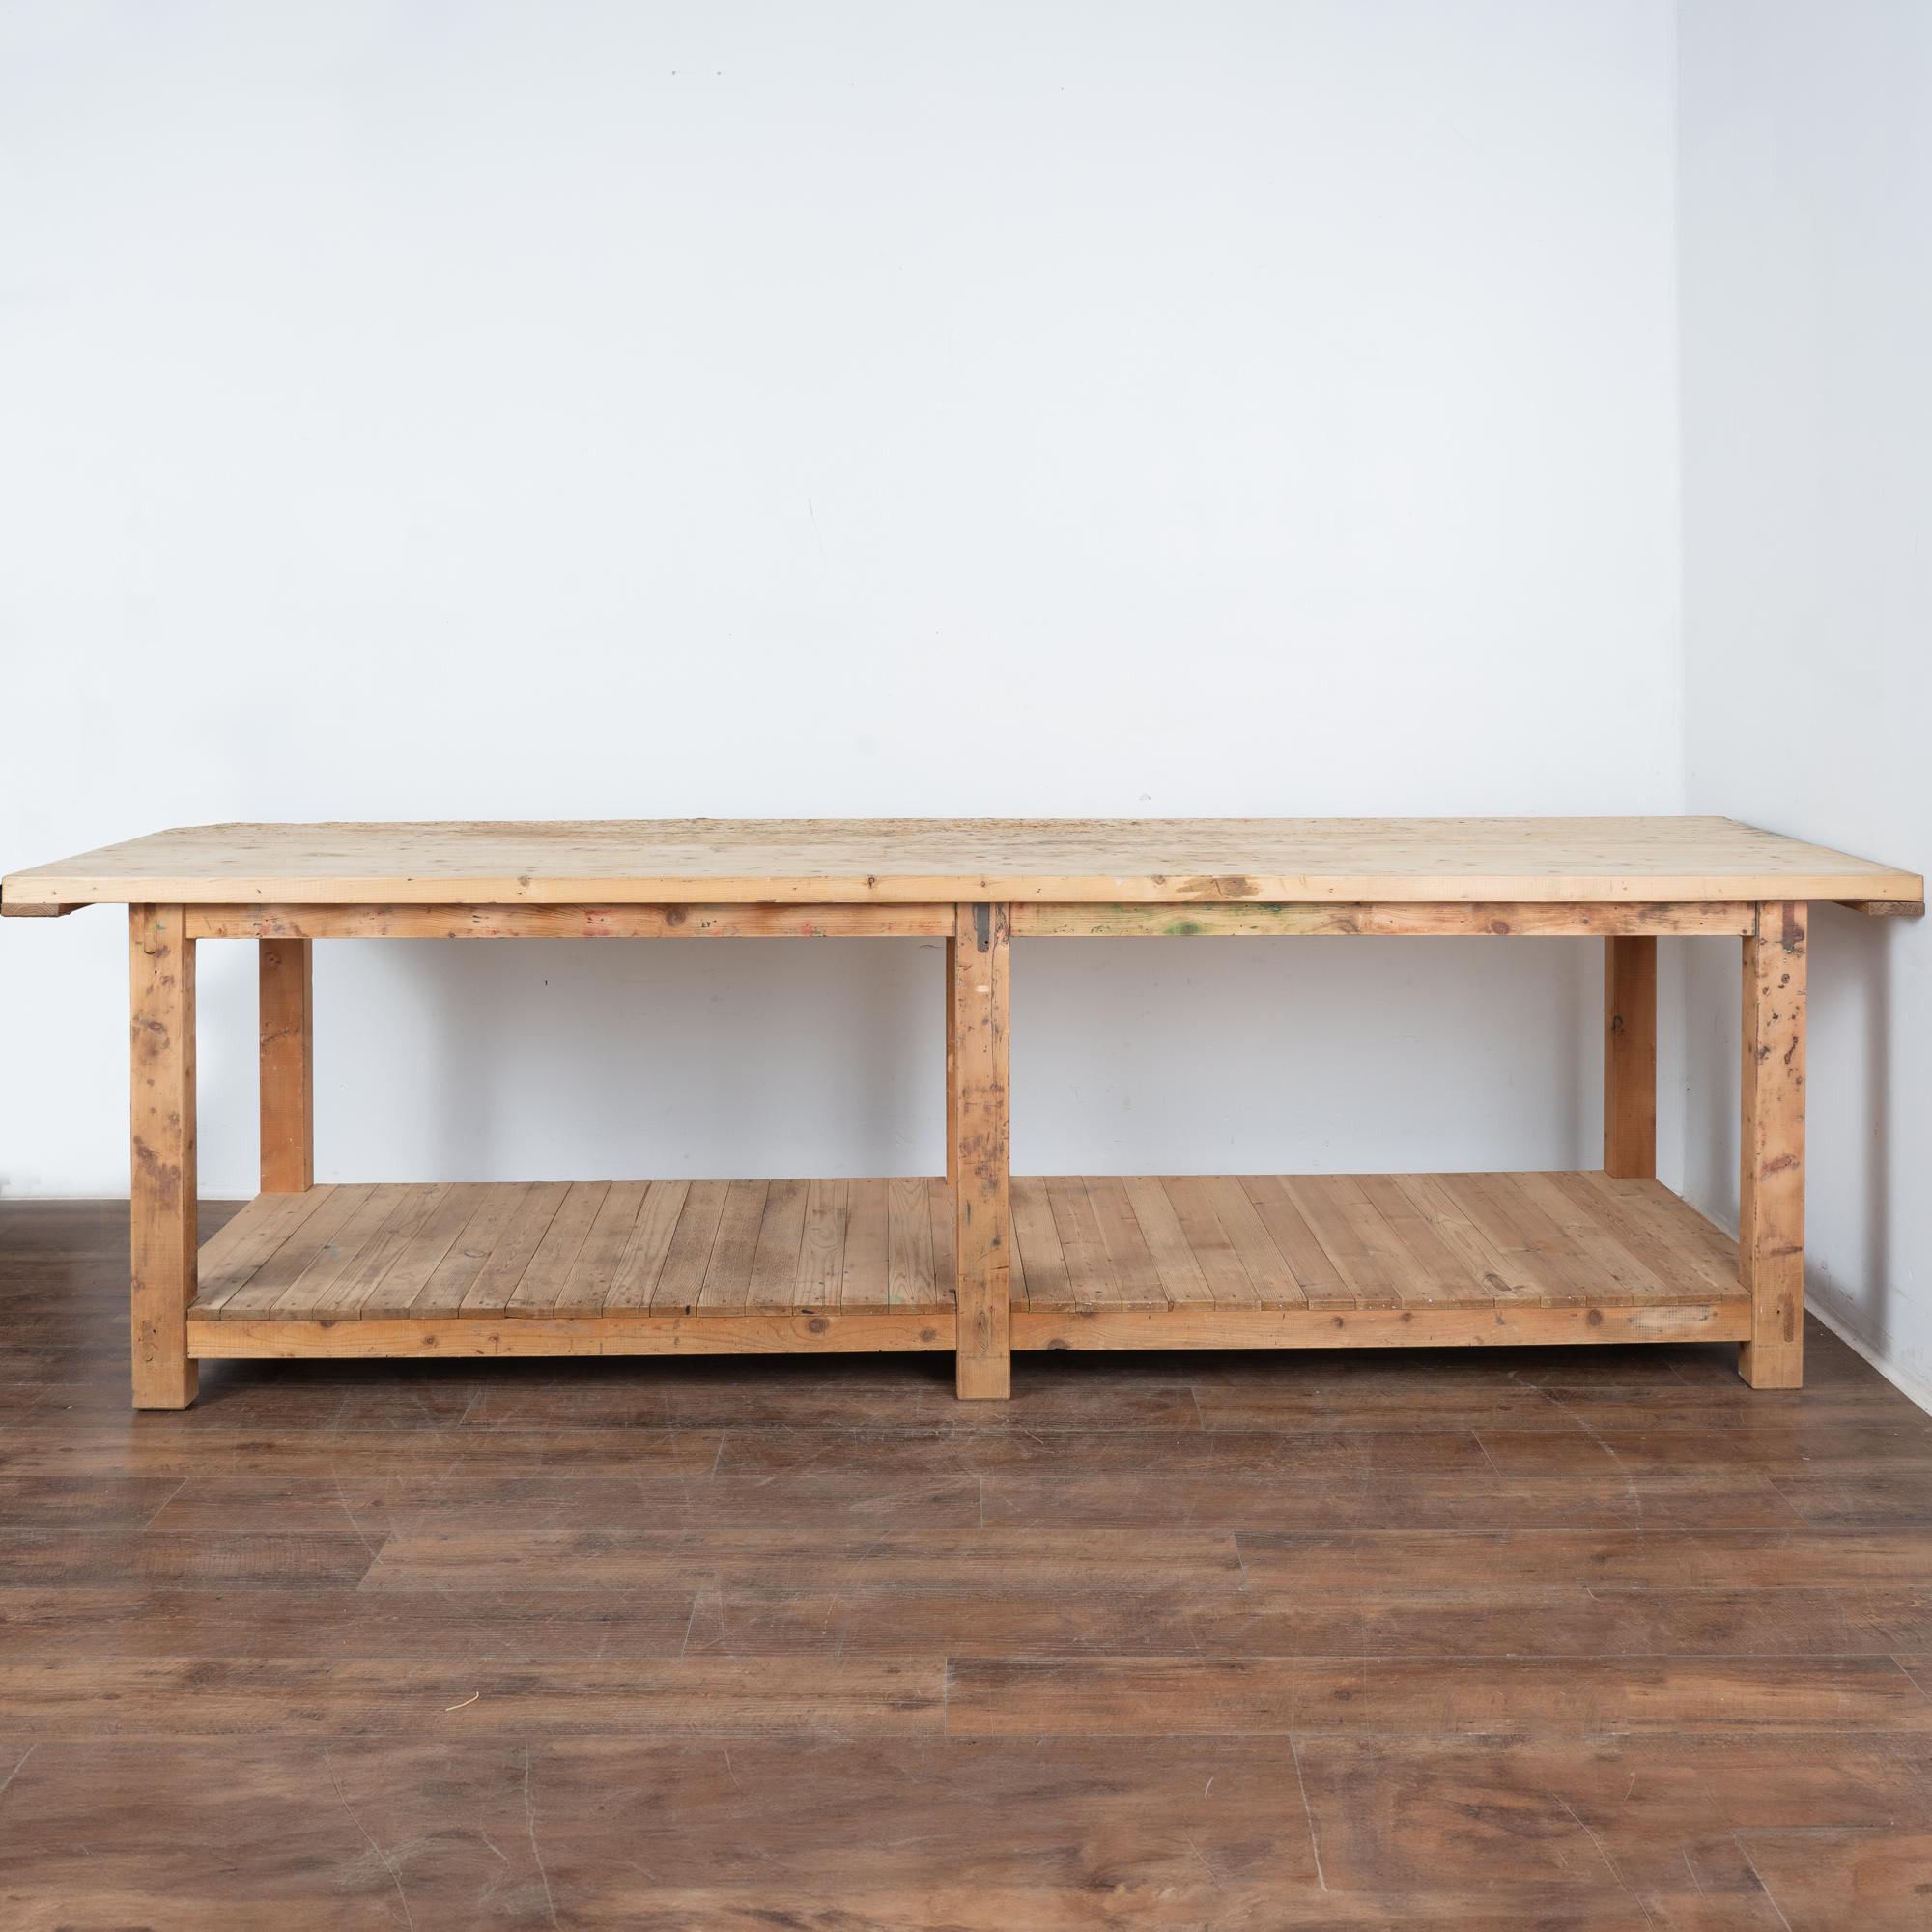 Hungarian Rustic 10' Long Work Table Kitchen Island With Shelf, Hungary circa 1900 For Sale